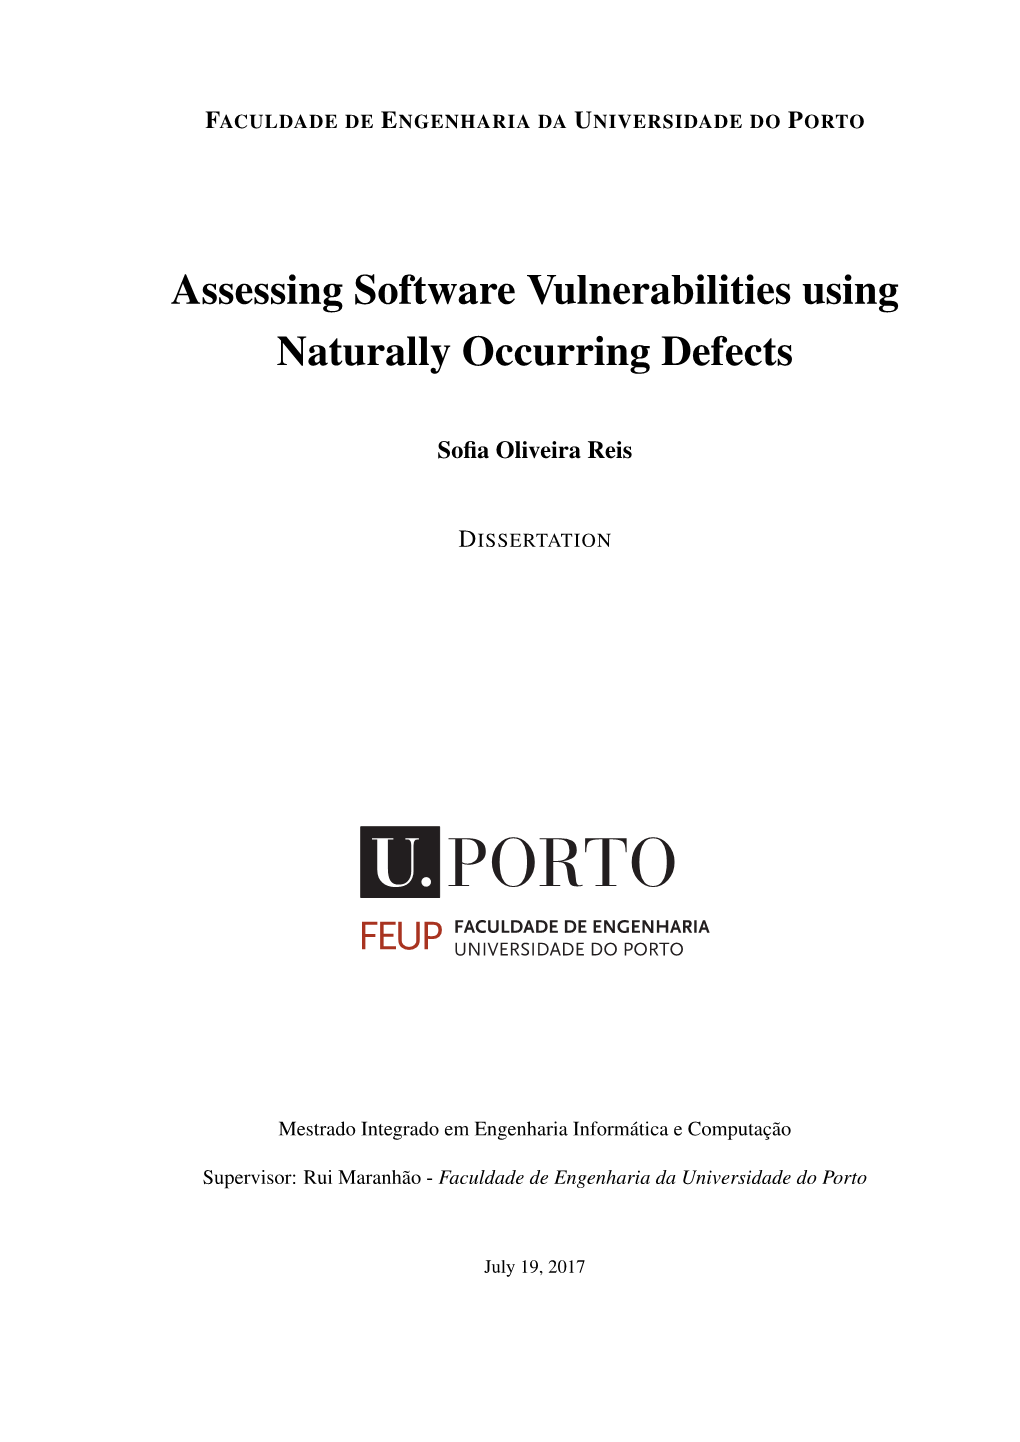 Assessing Software Vulnerabilities Using Naturally Occurring Defects